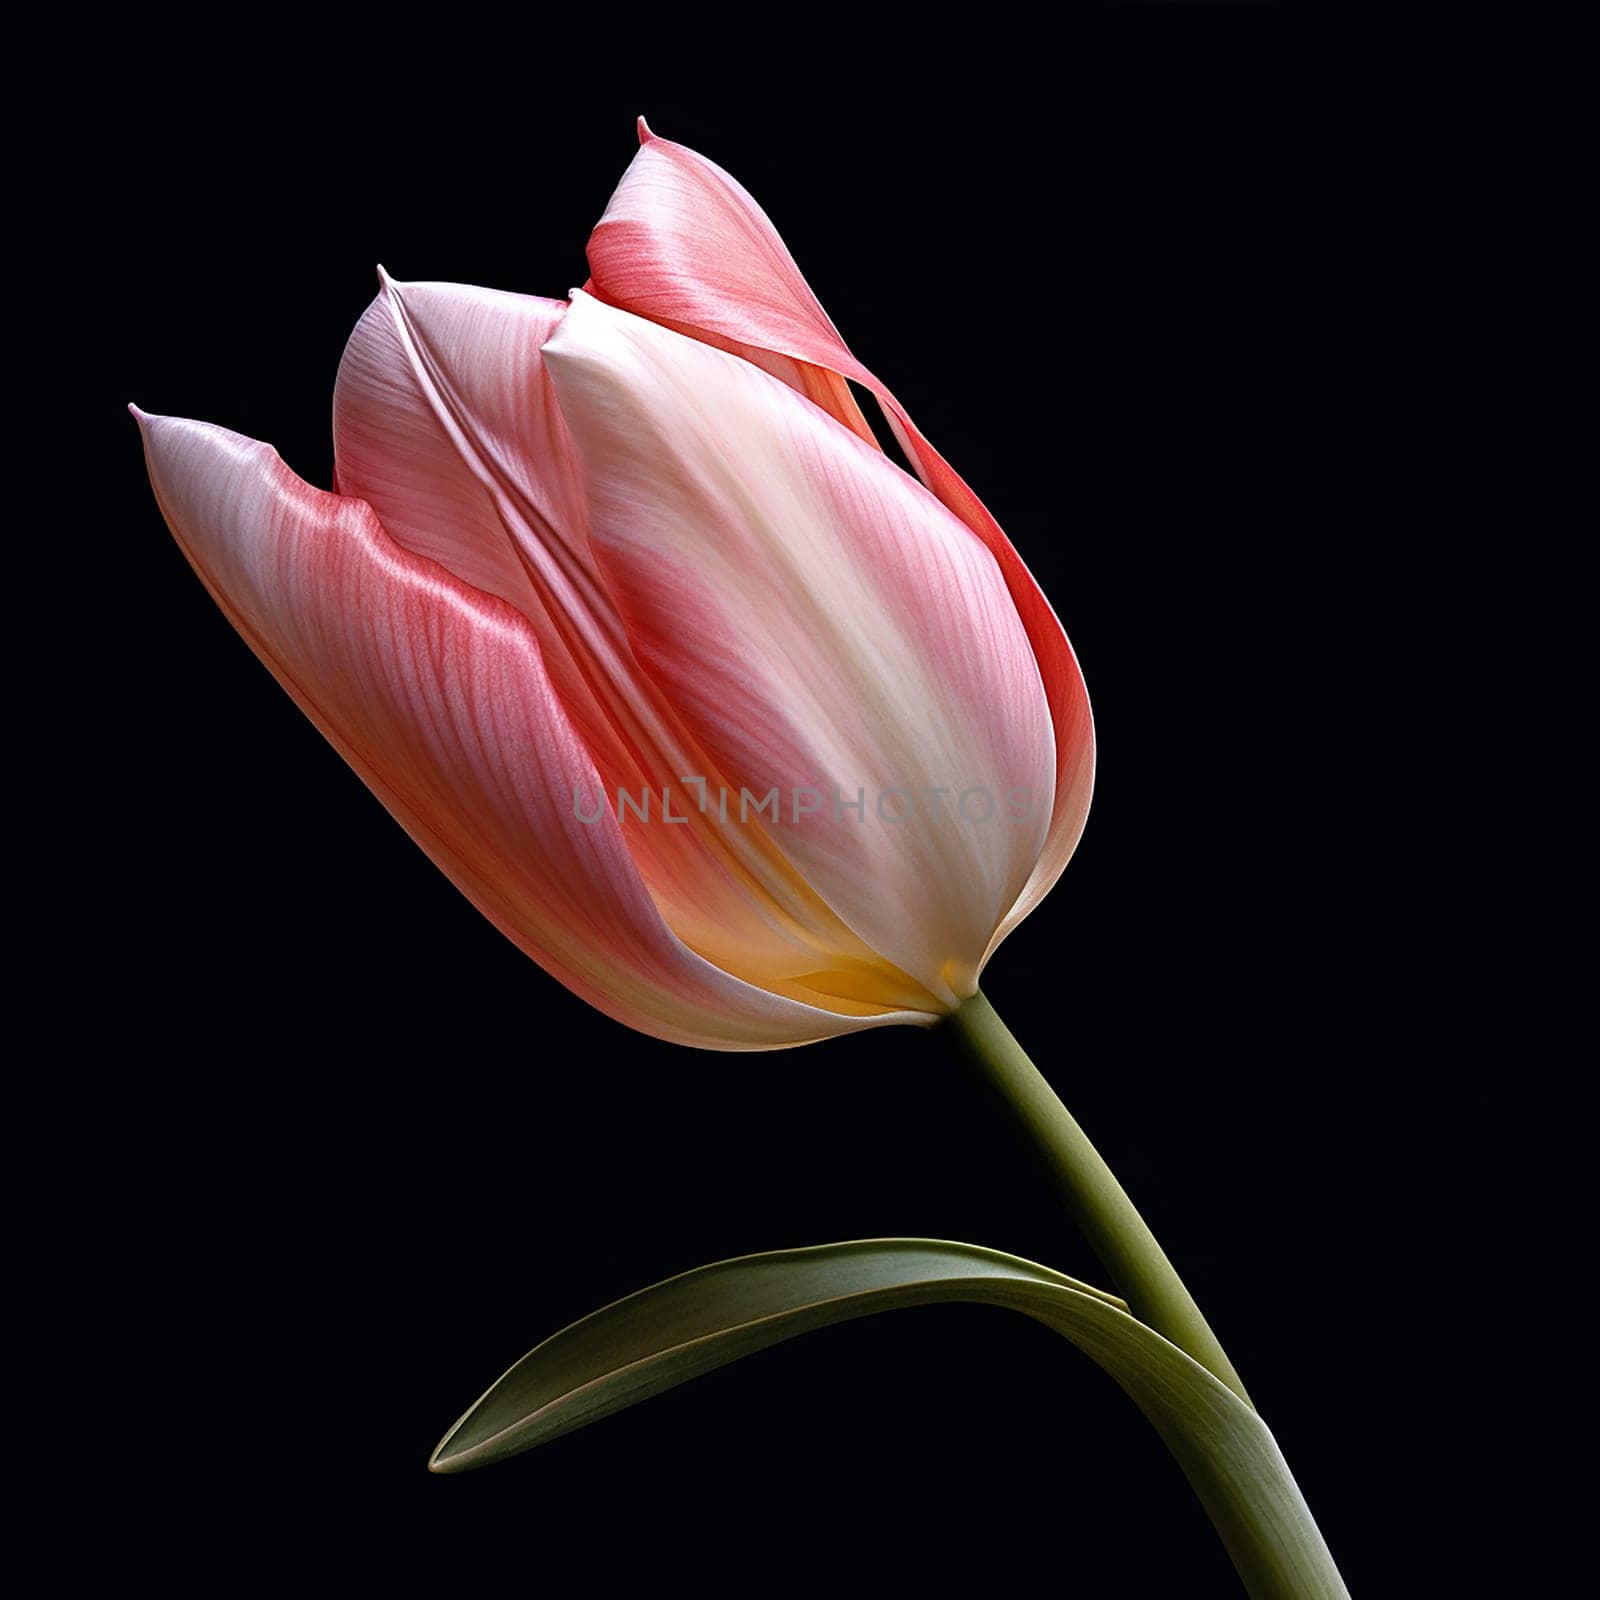 Elegant pink and white tulip against a black background